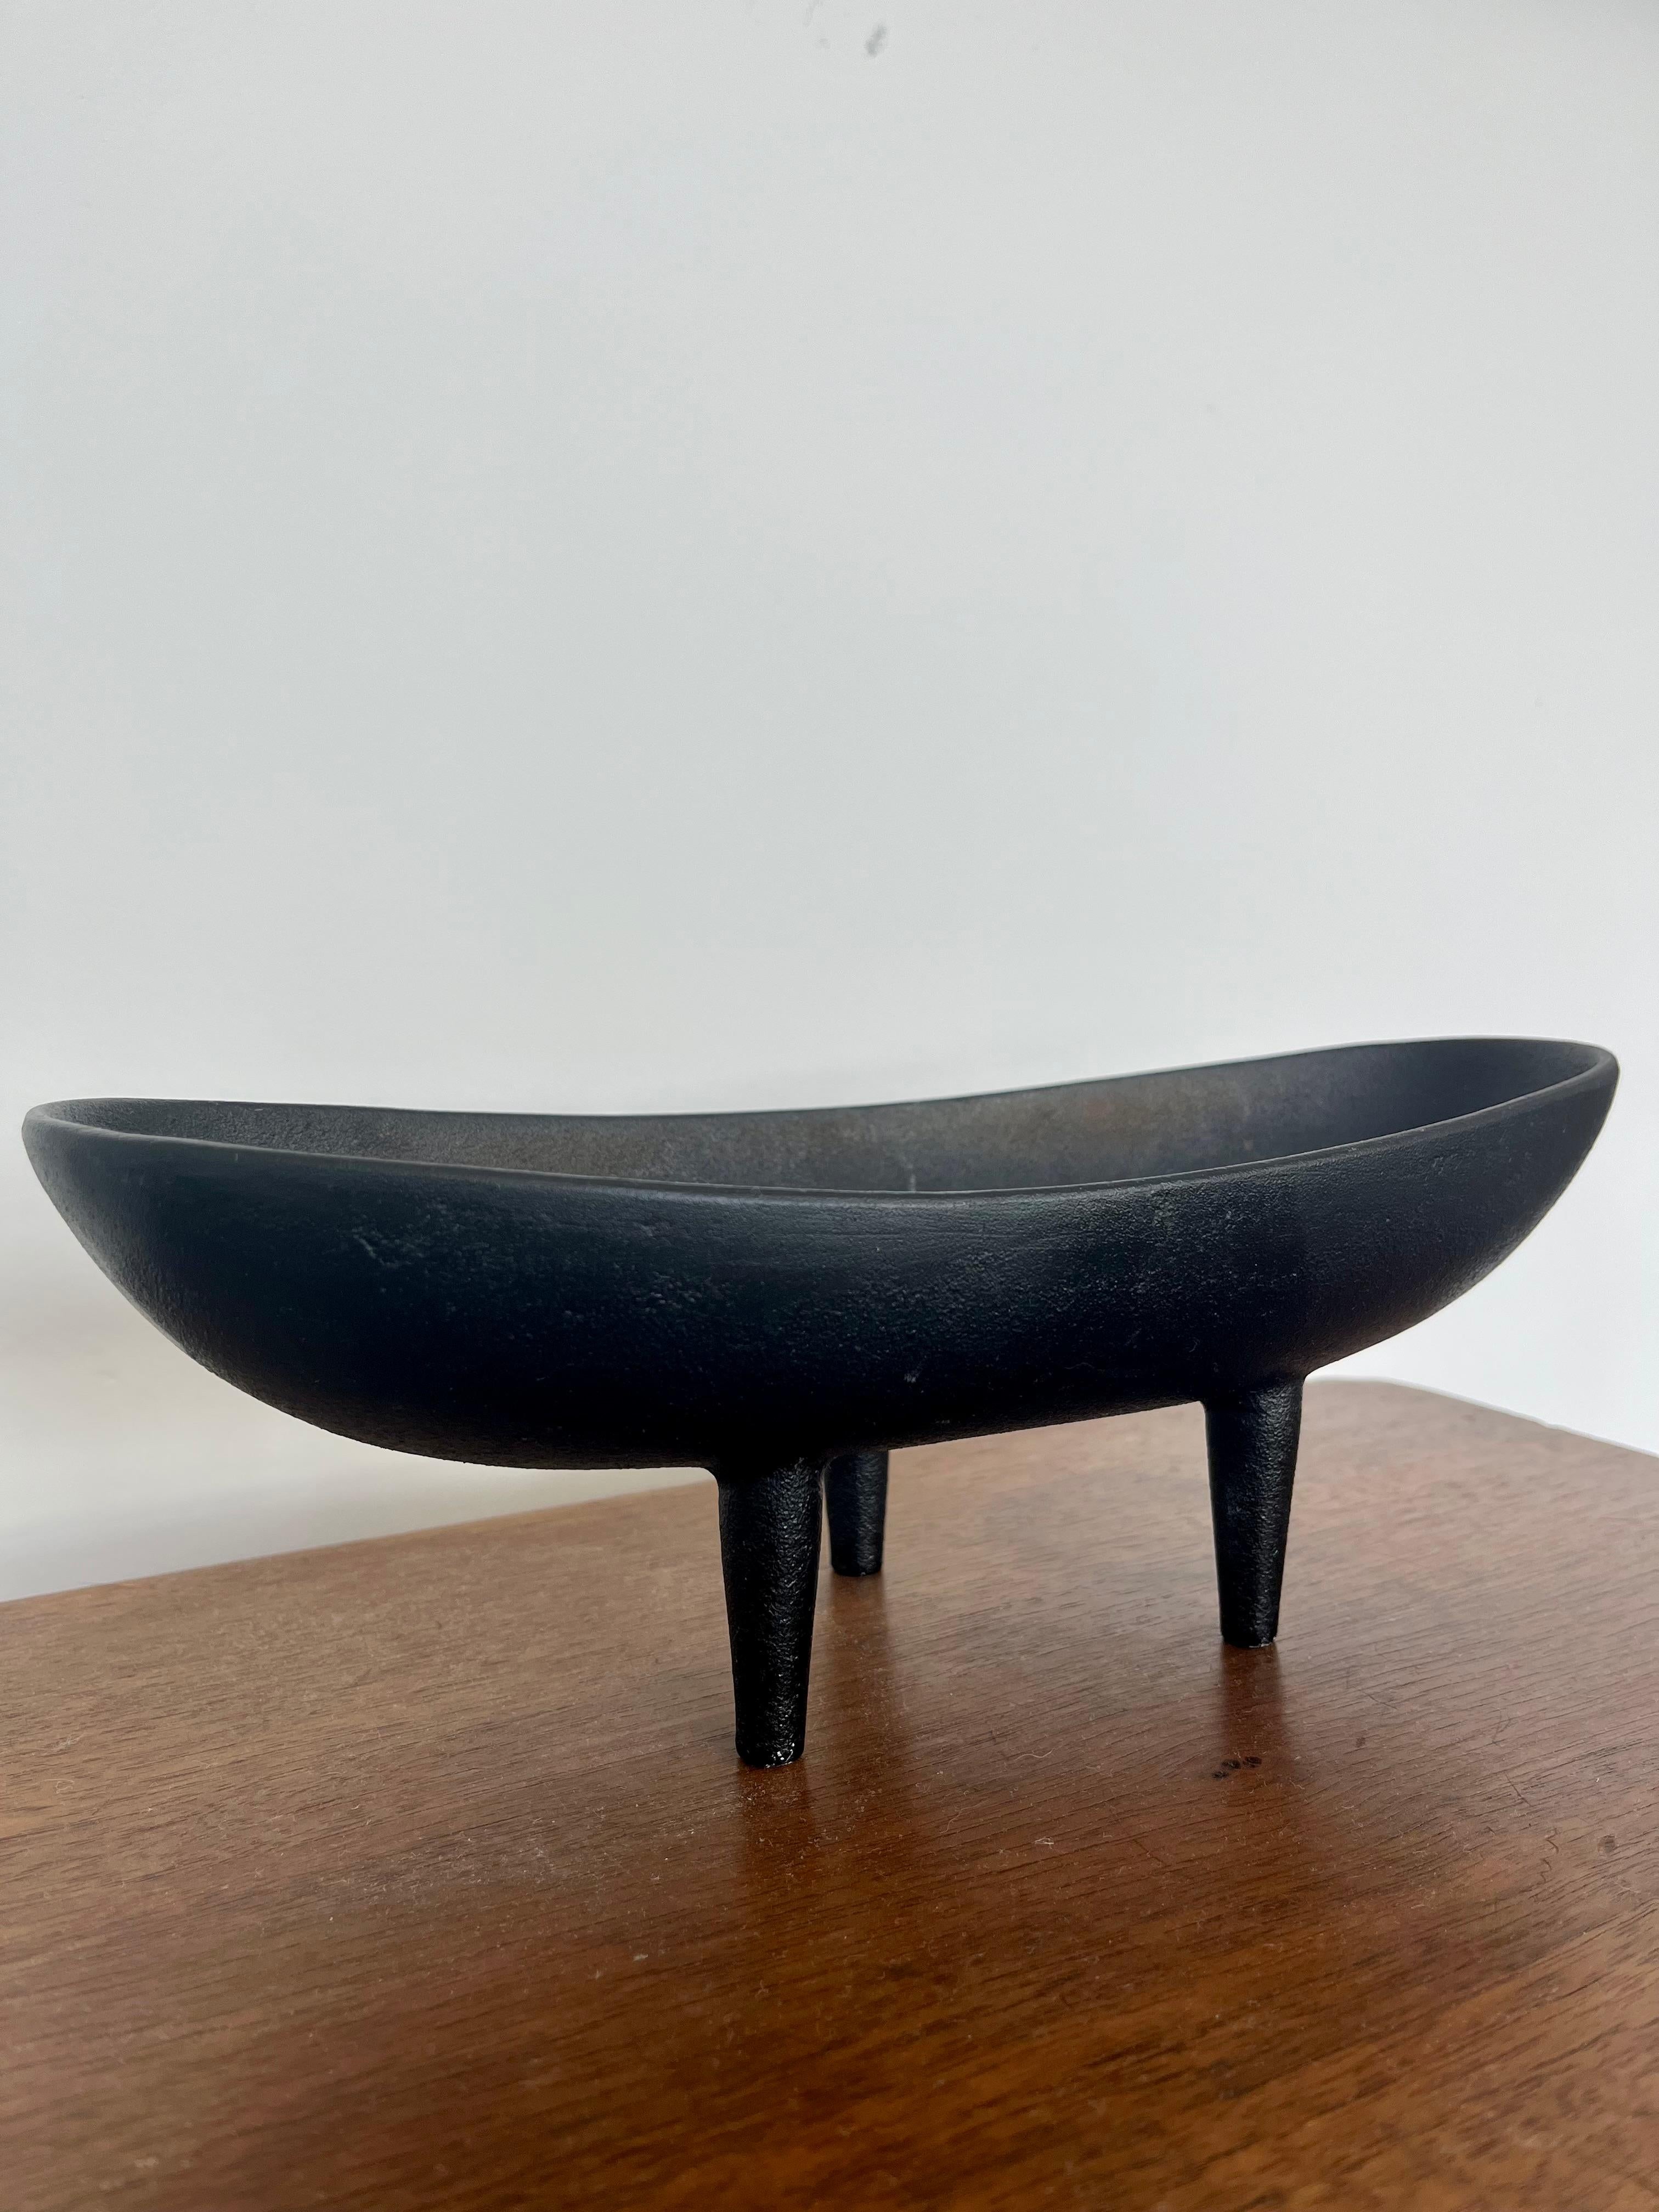 A cast iron three footed tripod bowl from Japan circa 1950s. similar to Isamu Noguchis designs for Bonniers. This would make a great centerpiece on a table or an accent piece on a shelf. 
Unmarked. 

Dimensions:
10.5